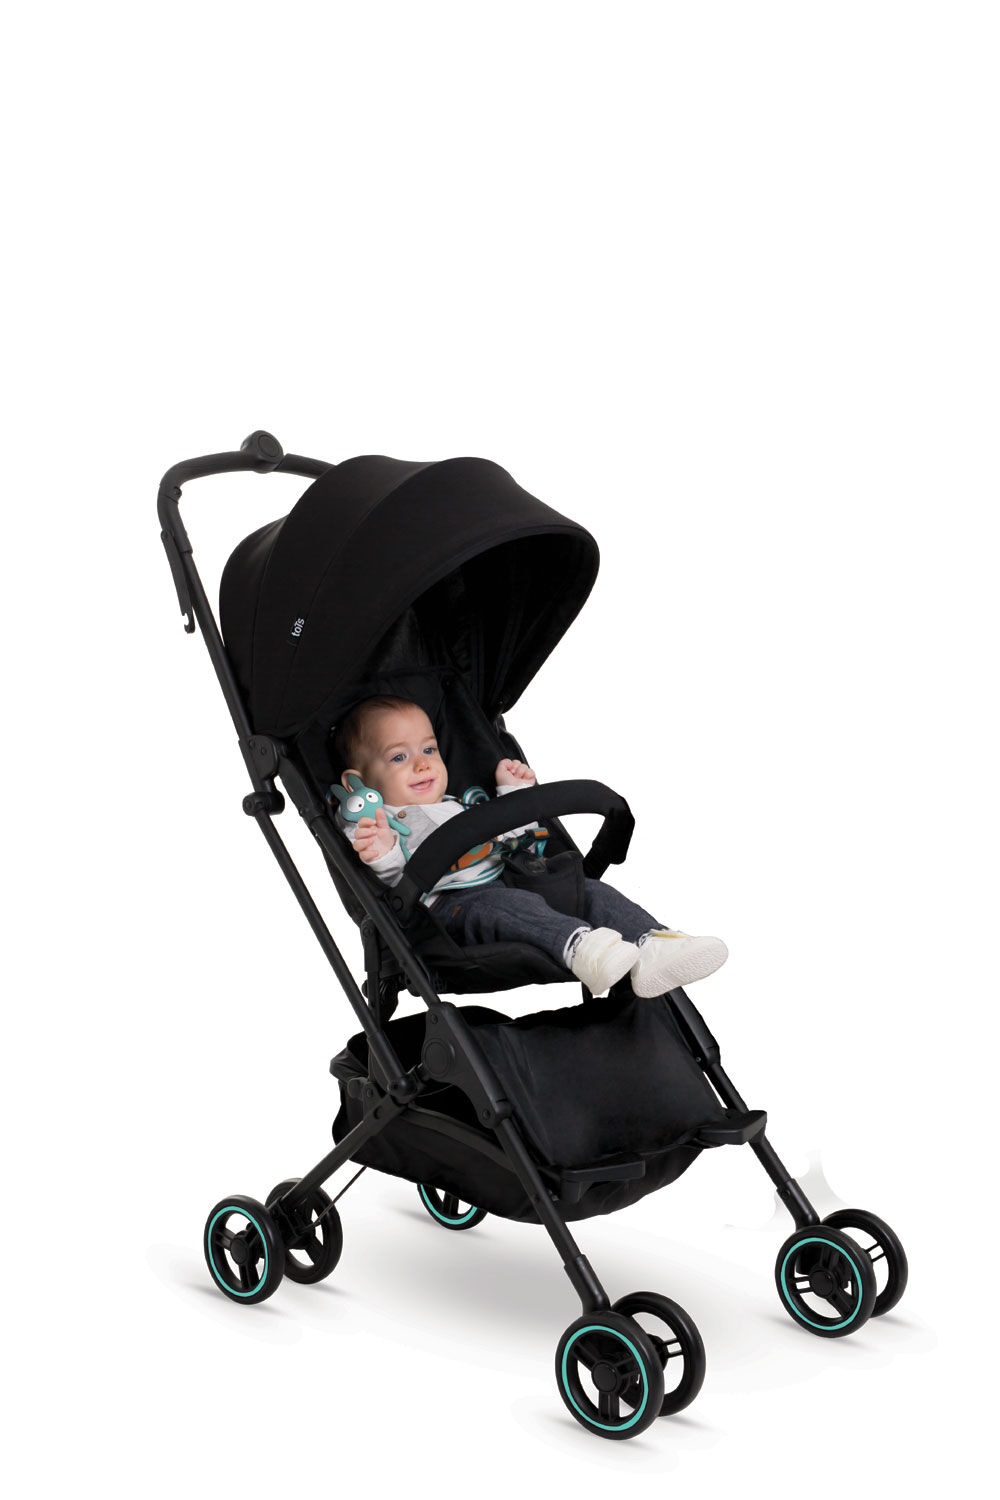 minimi stroller review